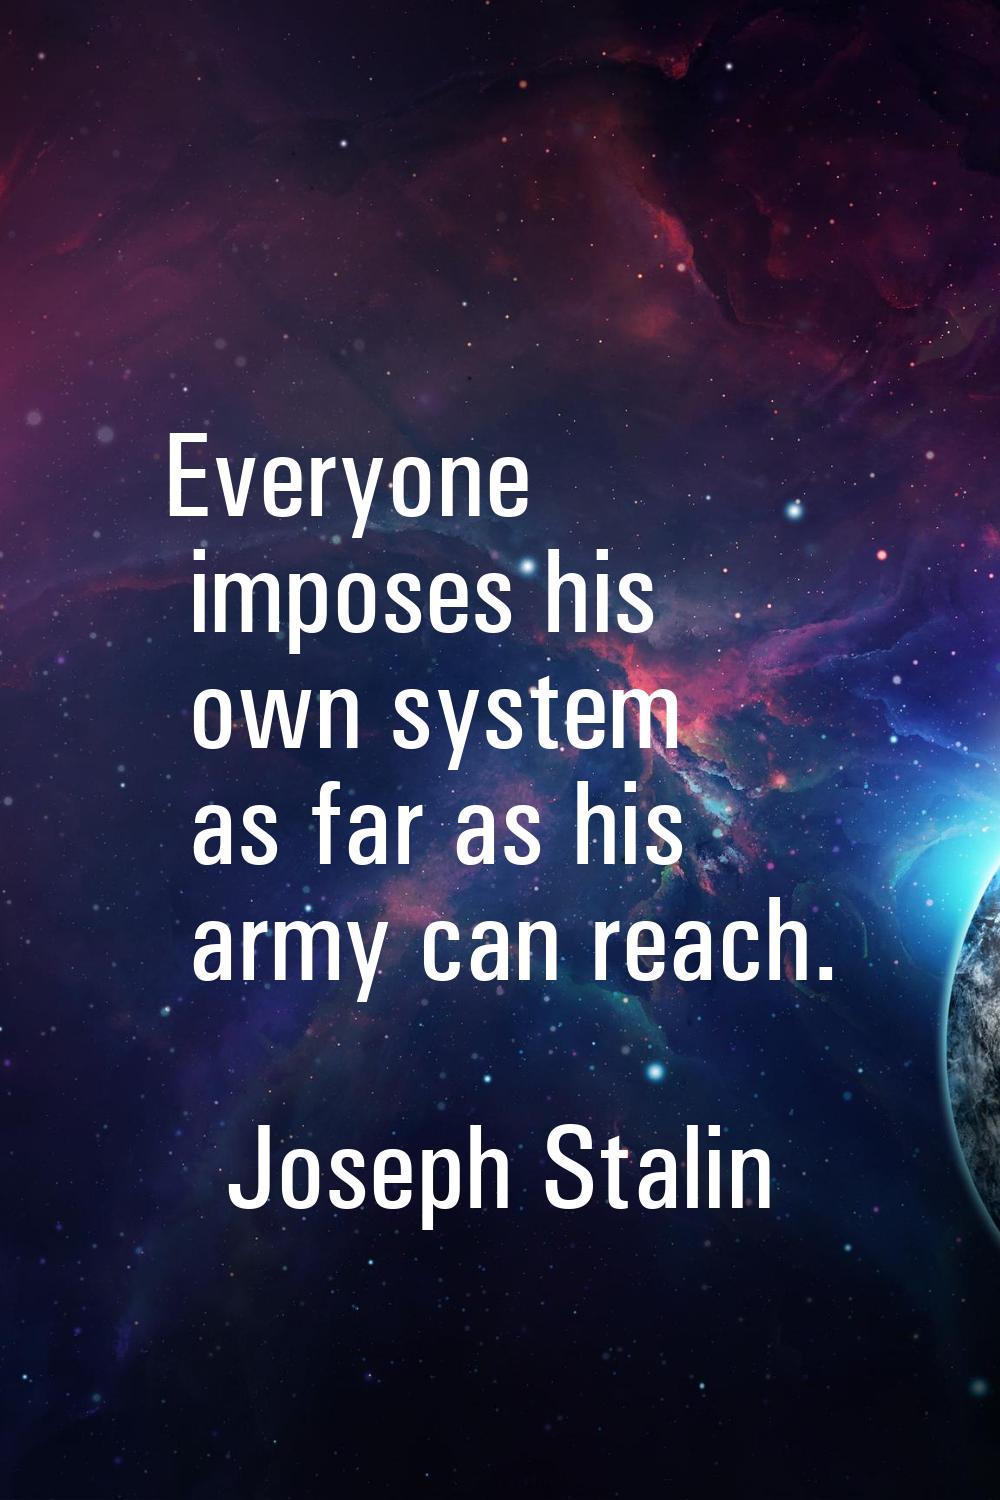 Everyone imposes his own system as far as his army can reach.